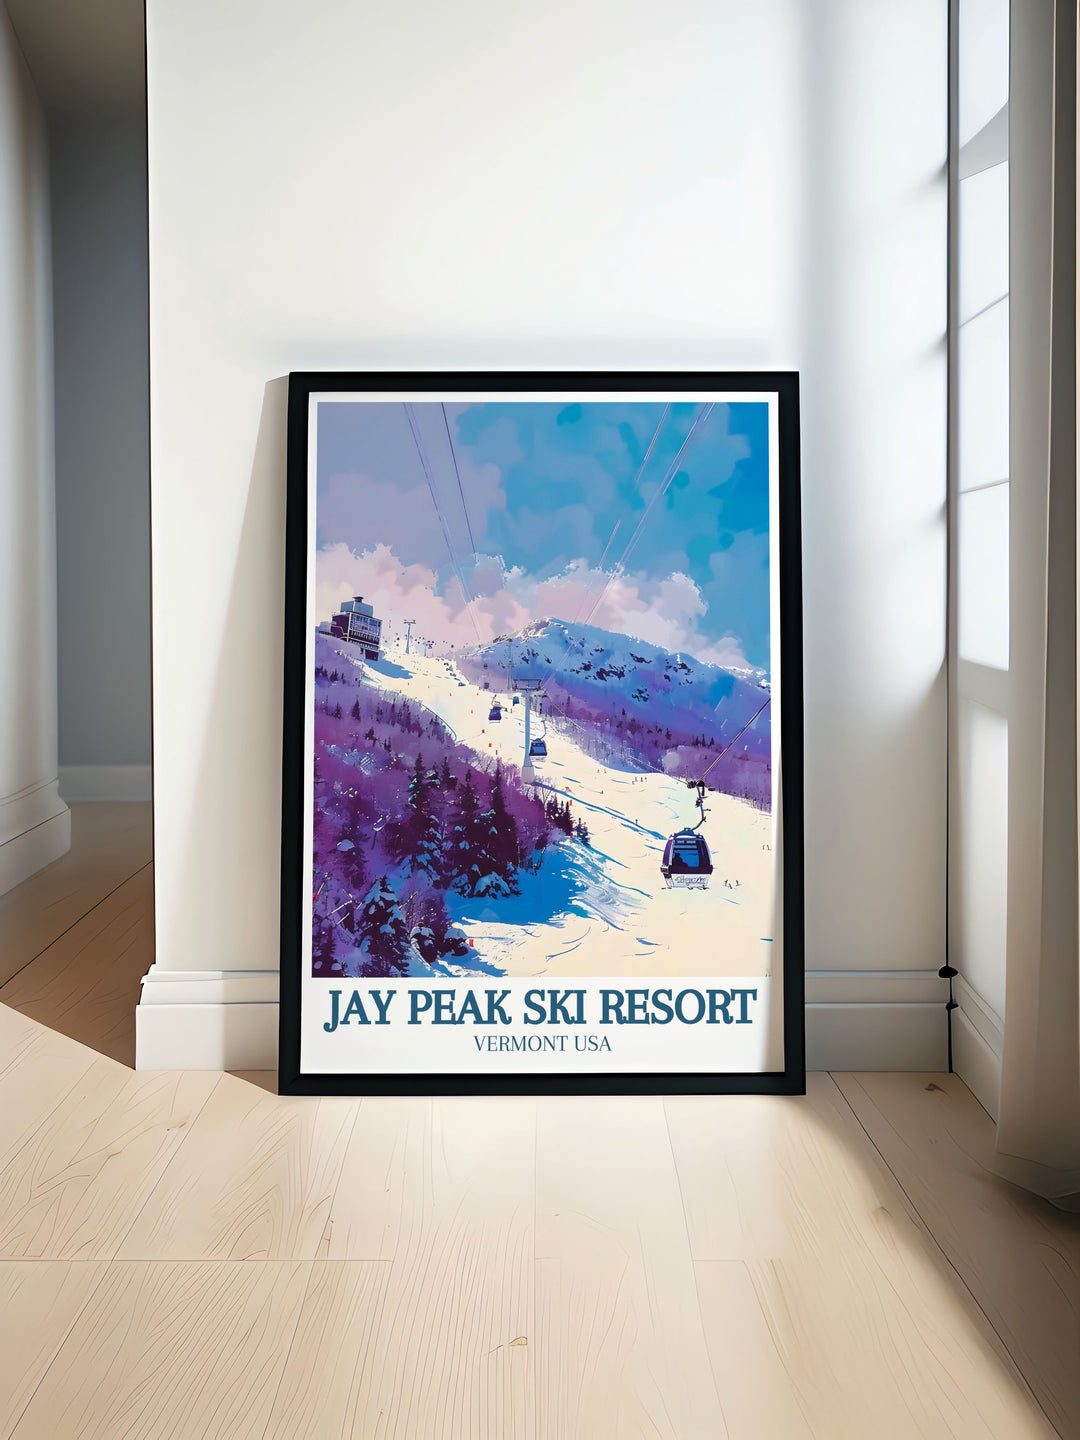 Showcasing the friendly and charming atmosphere of Burke Mountain, this vintage ski print is perfect for ski enthusiasts and collectors.